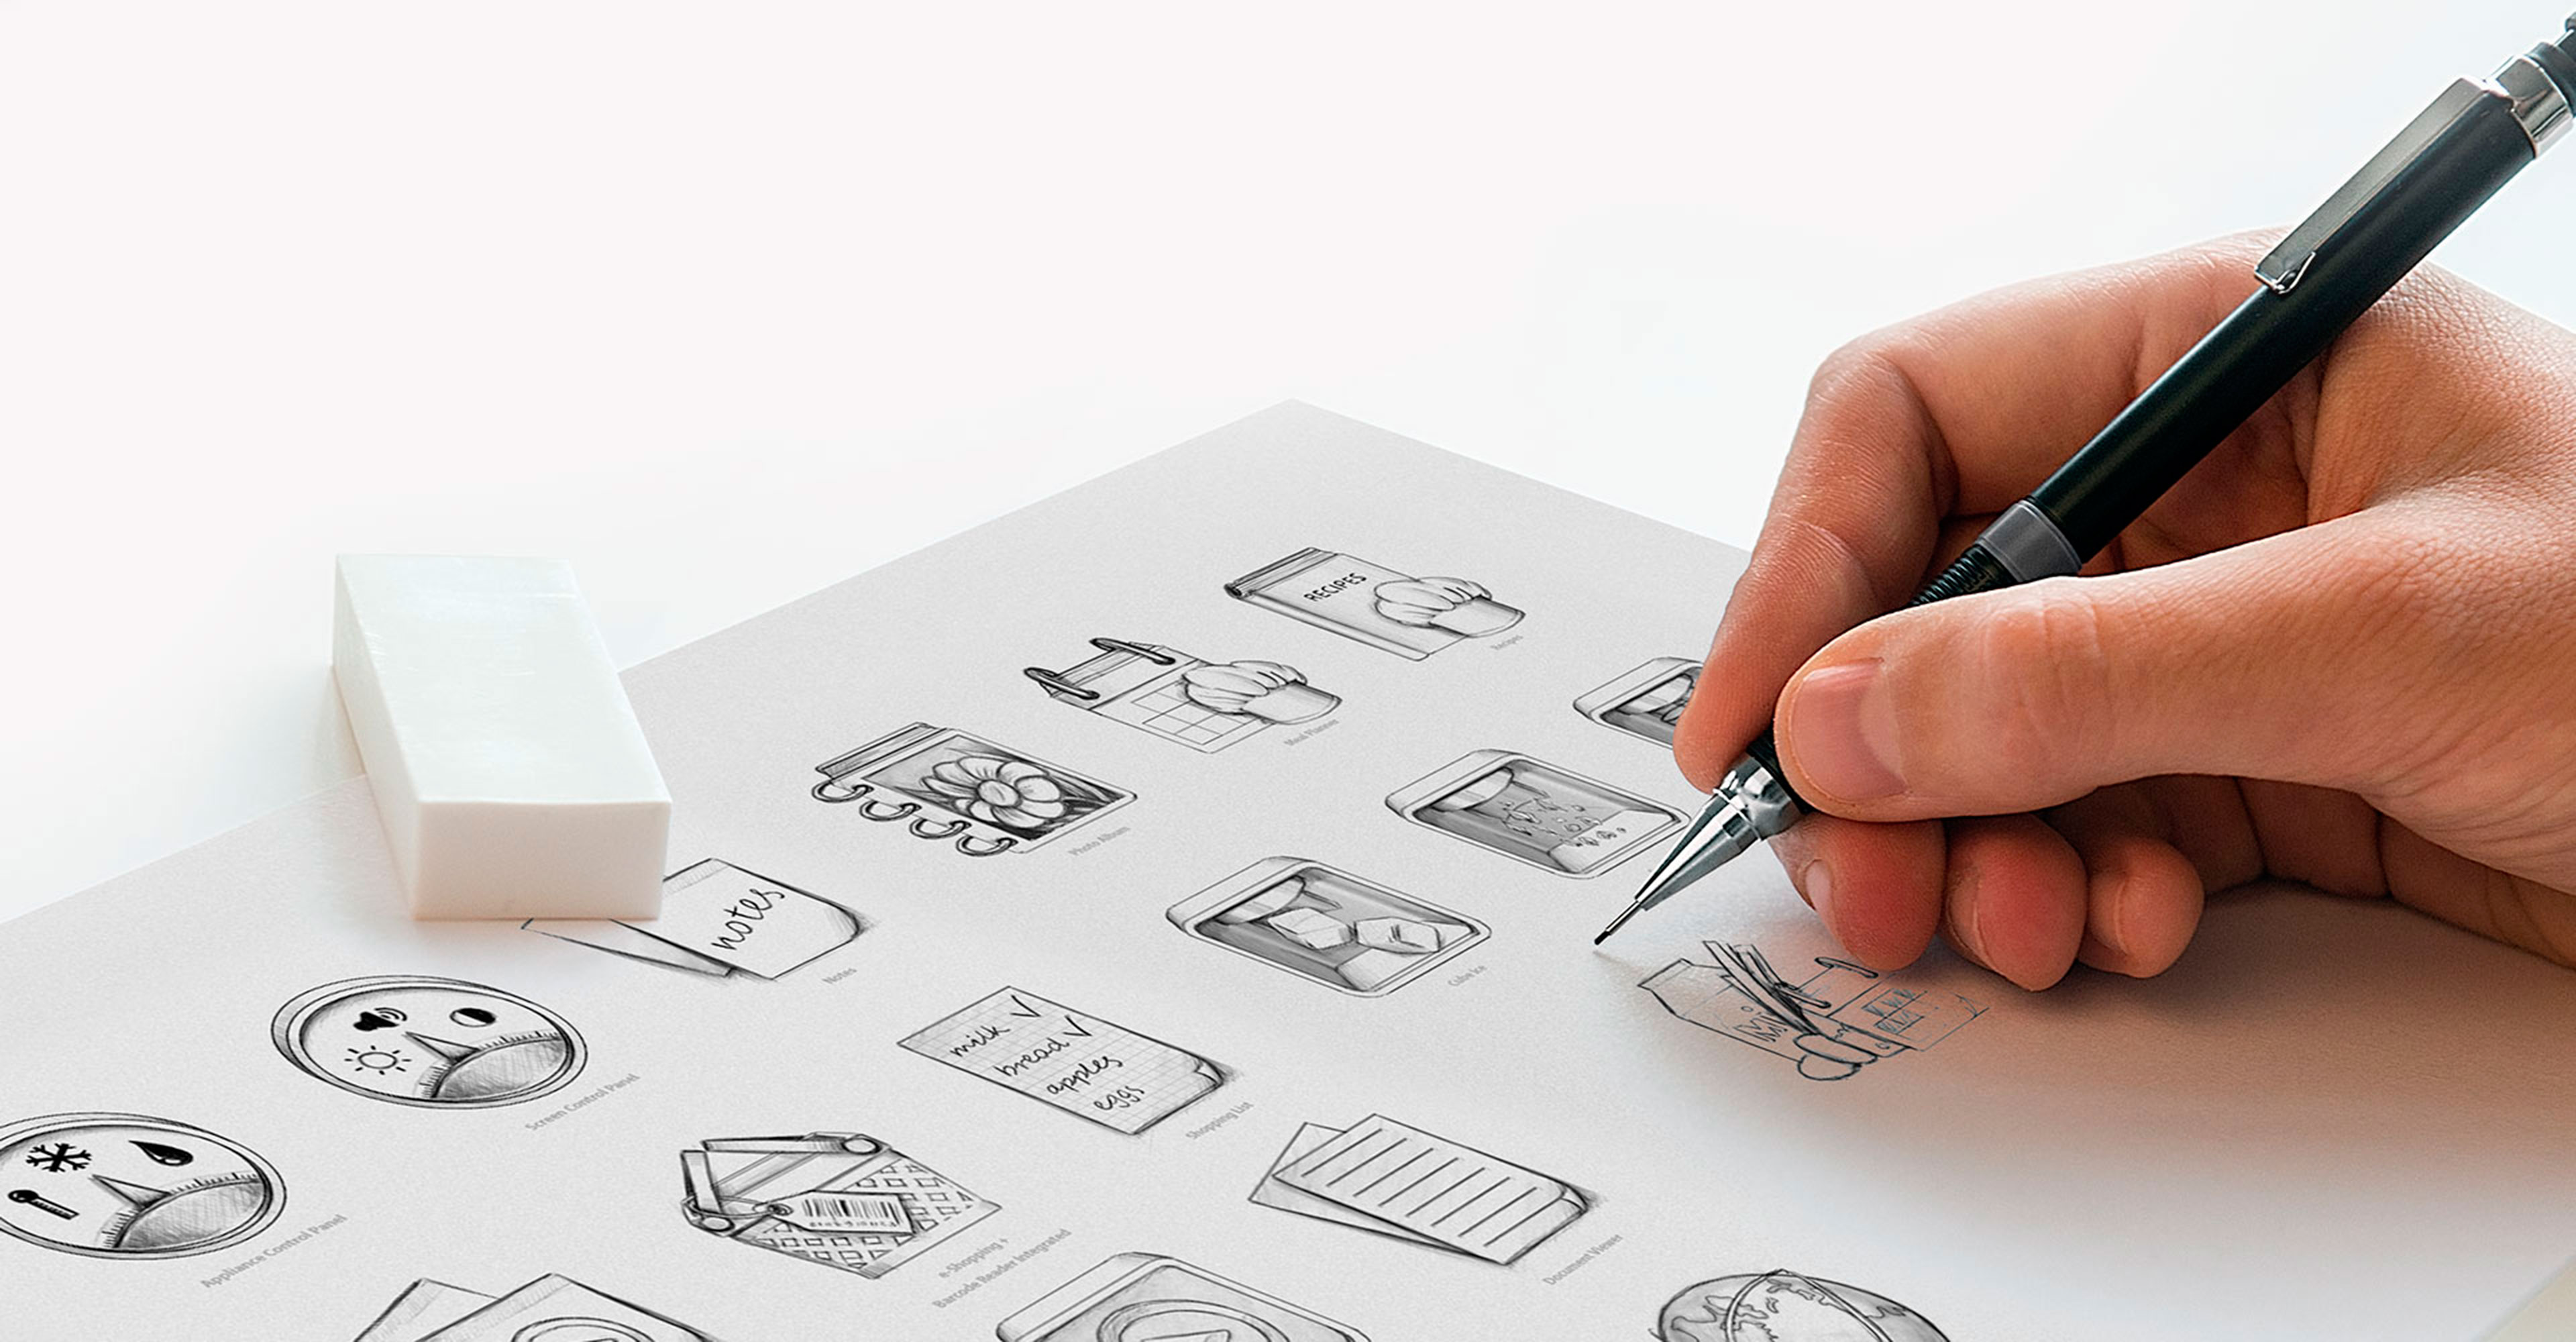 Icons design process - Sketches